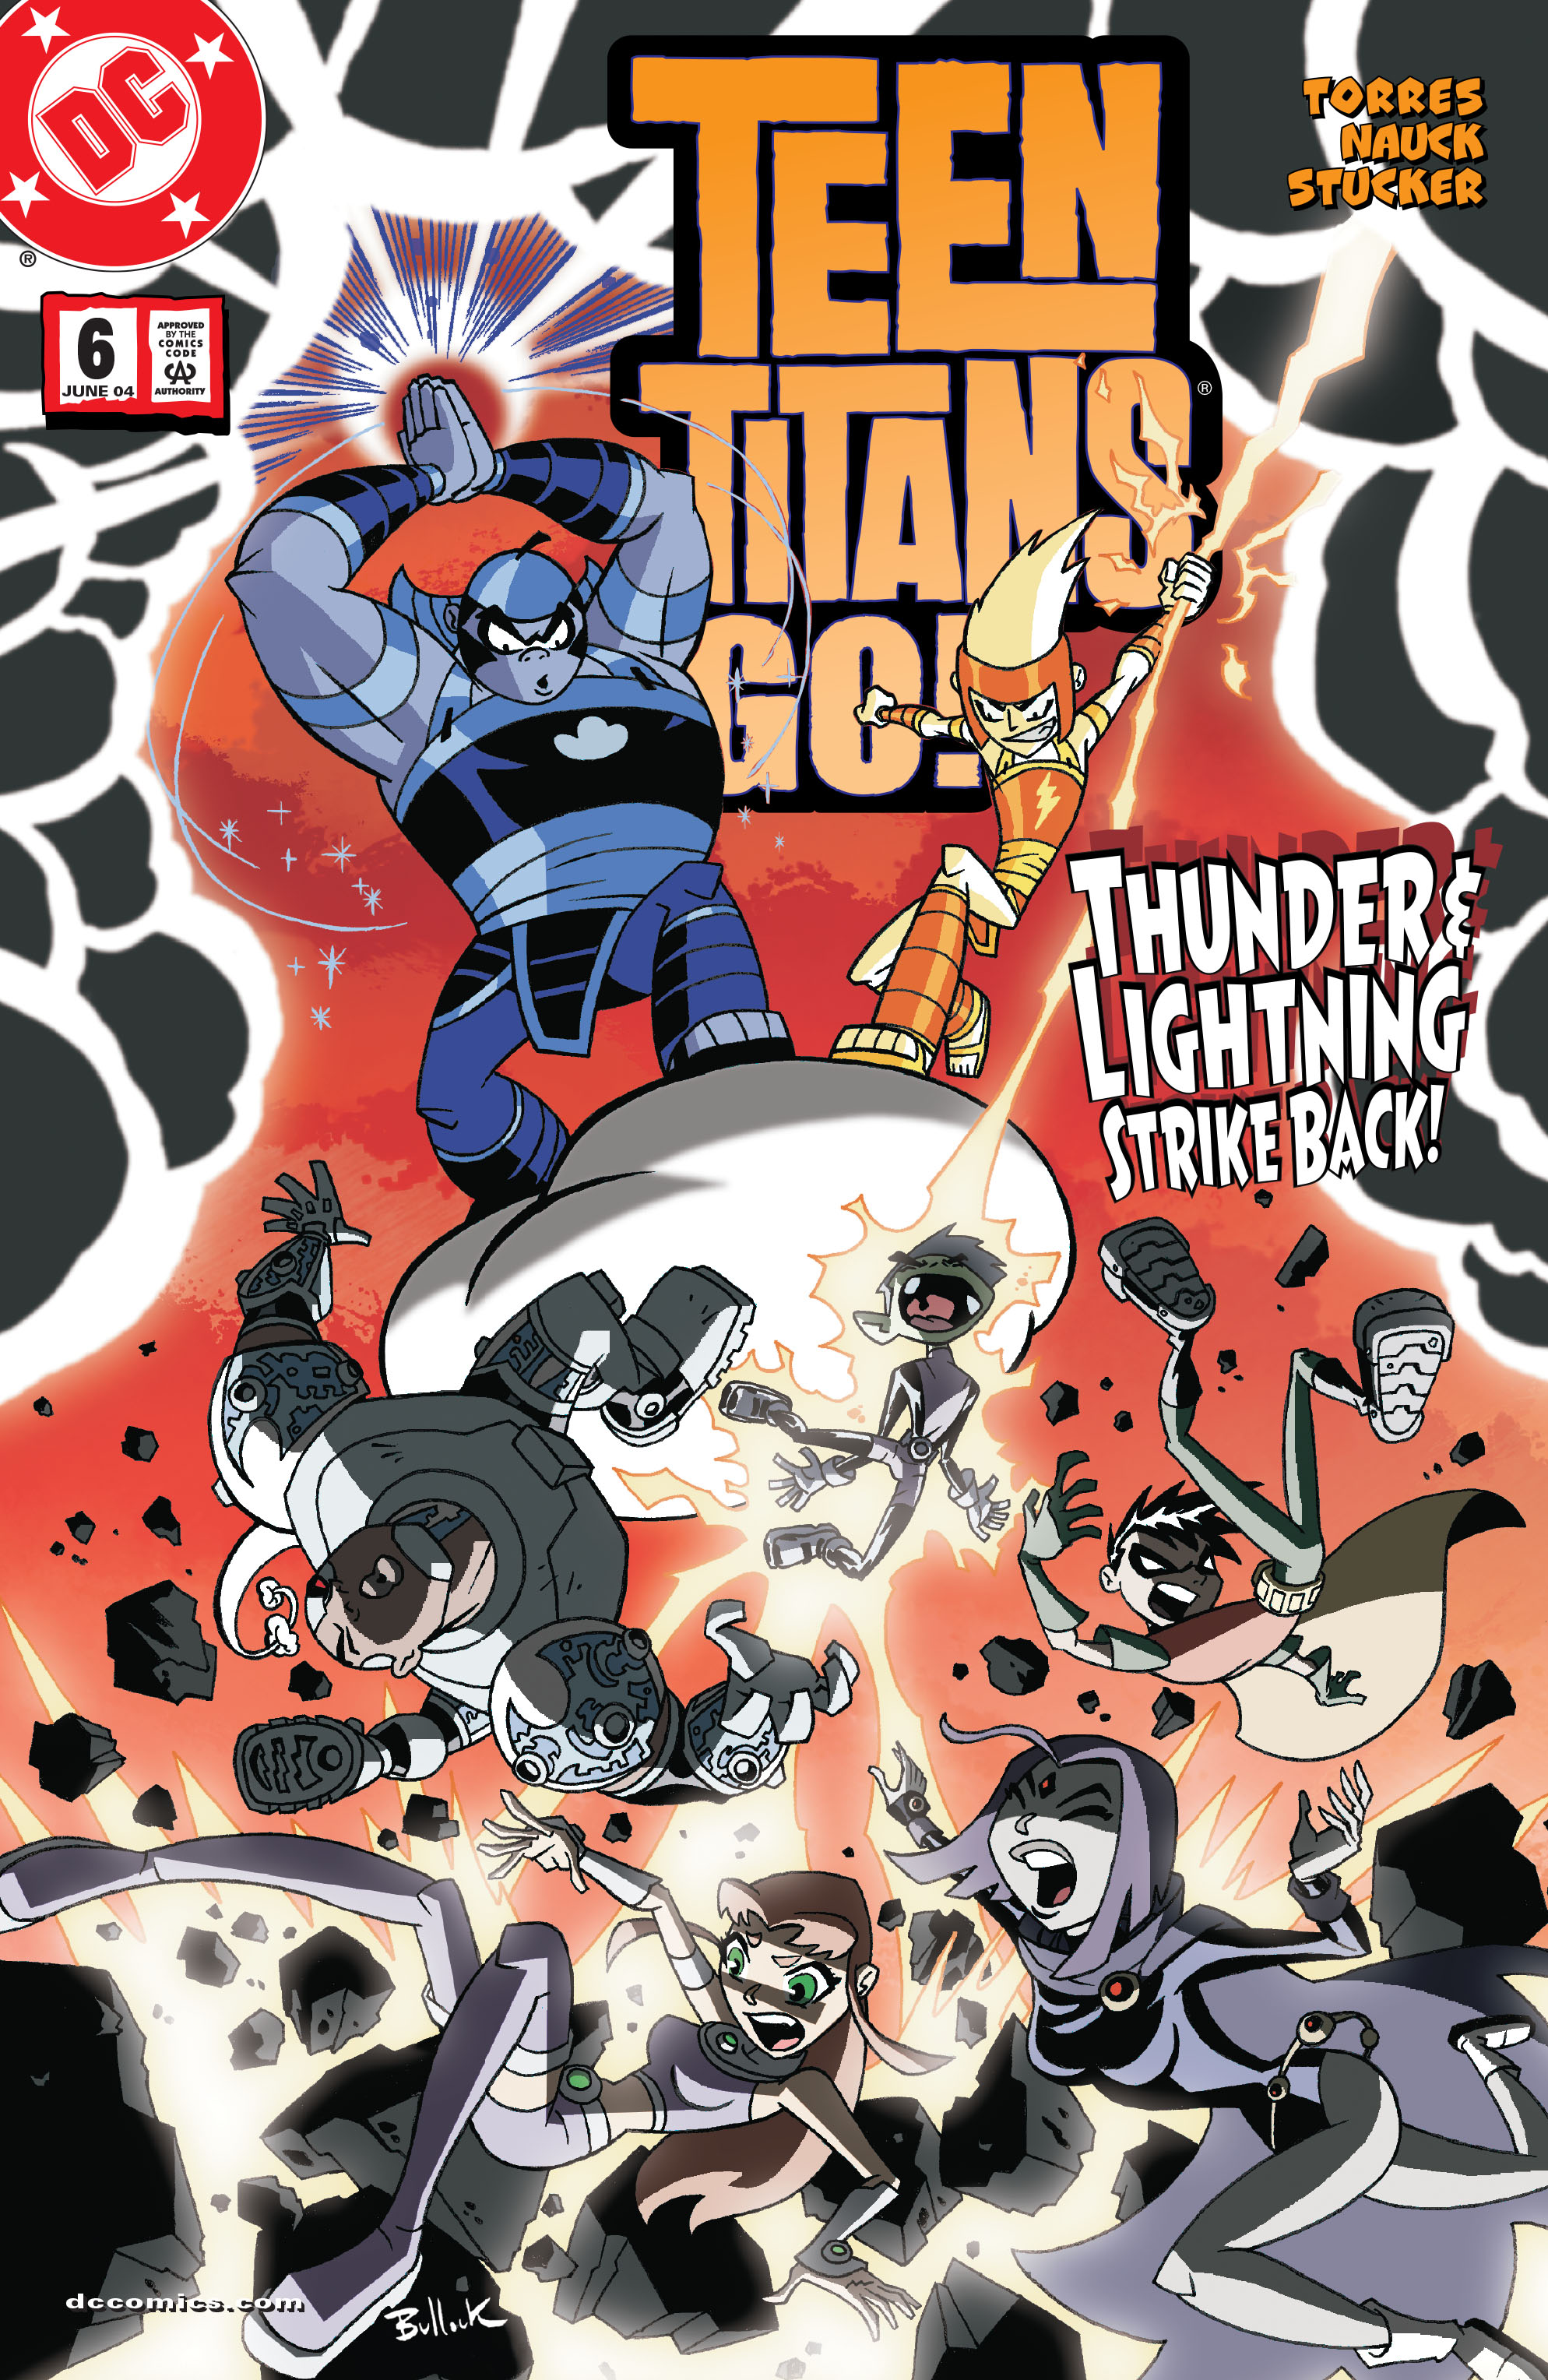 Teen Titans Go! (2003-) #6 preview images